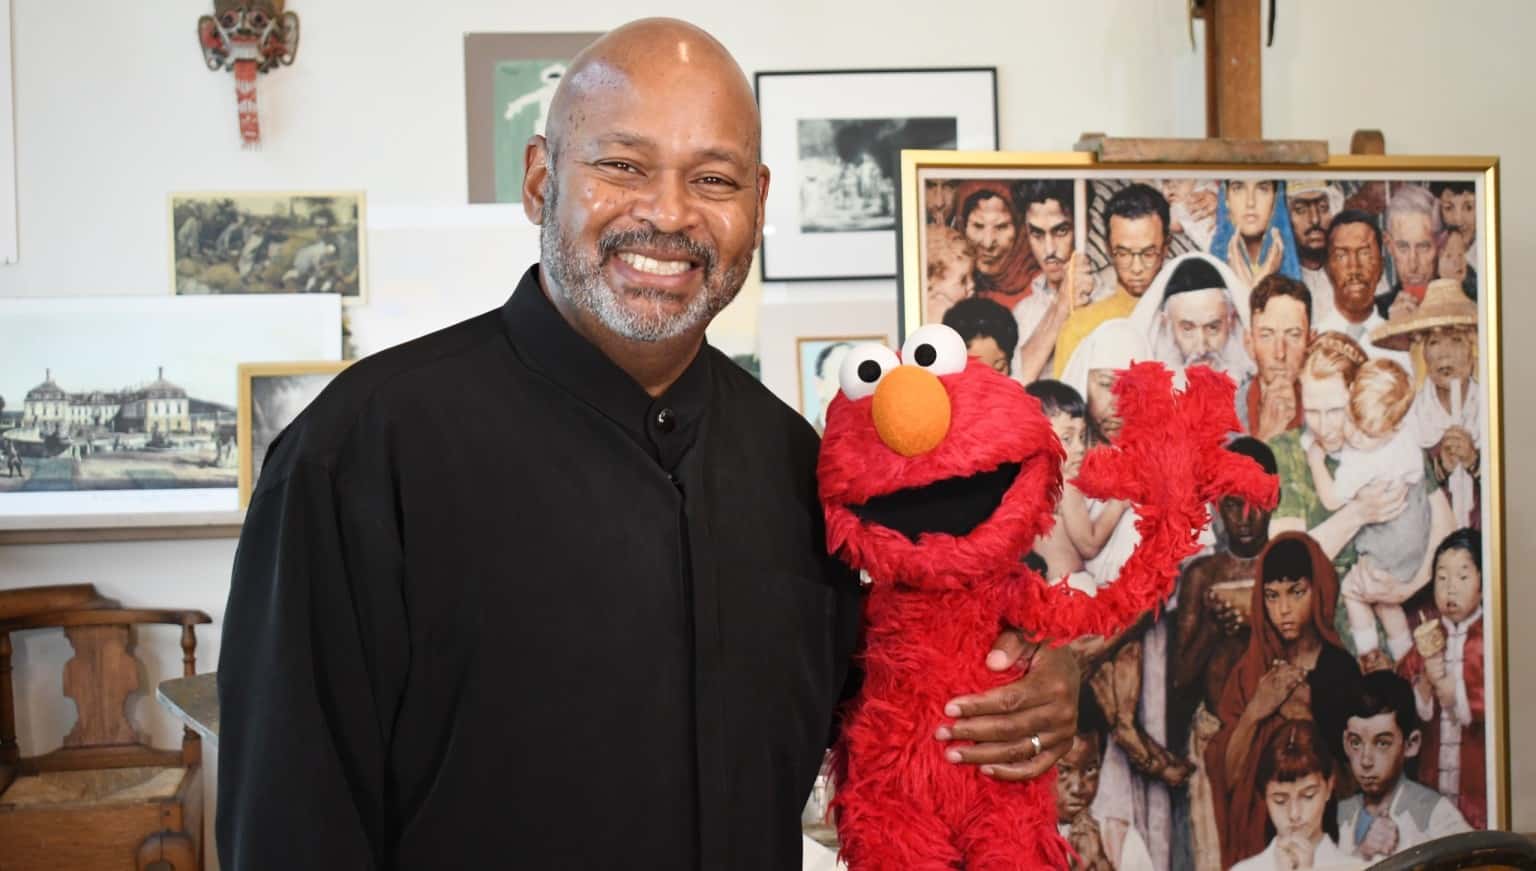 Louis Henry Mitchell, Creative Director of Character Design for Sesame Workshop, will talk creative expression, waves wiith Elmo. Press image courtesy of the Norman Rockwell Museum